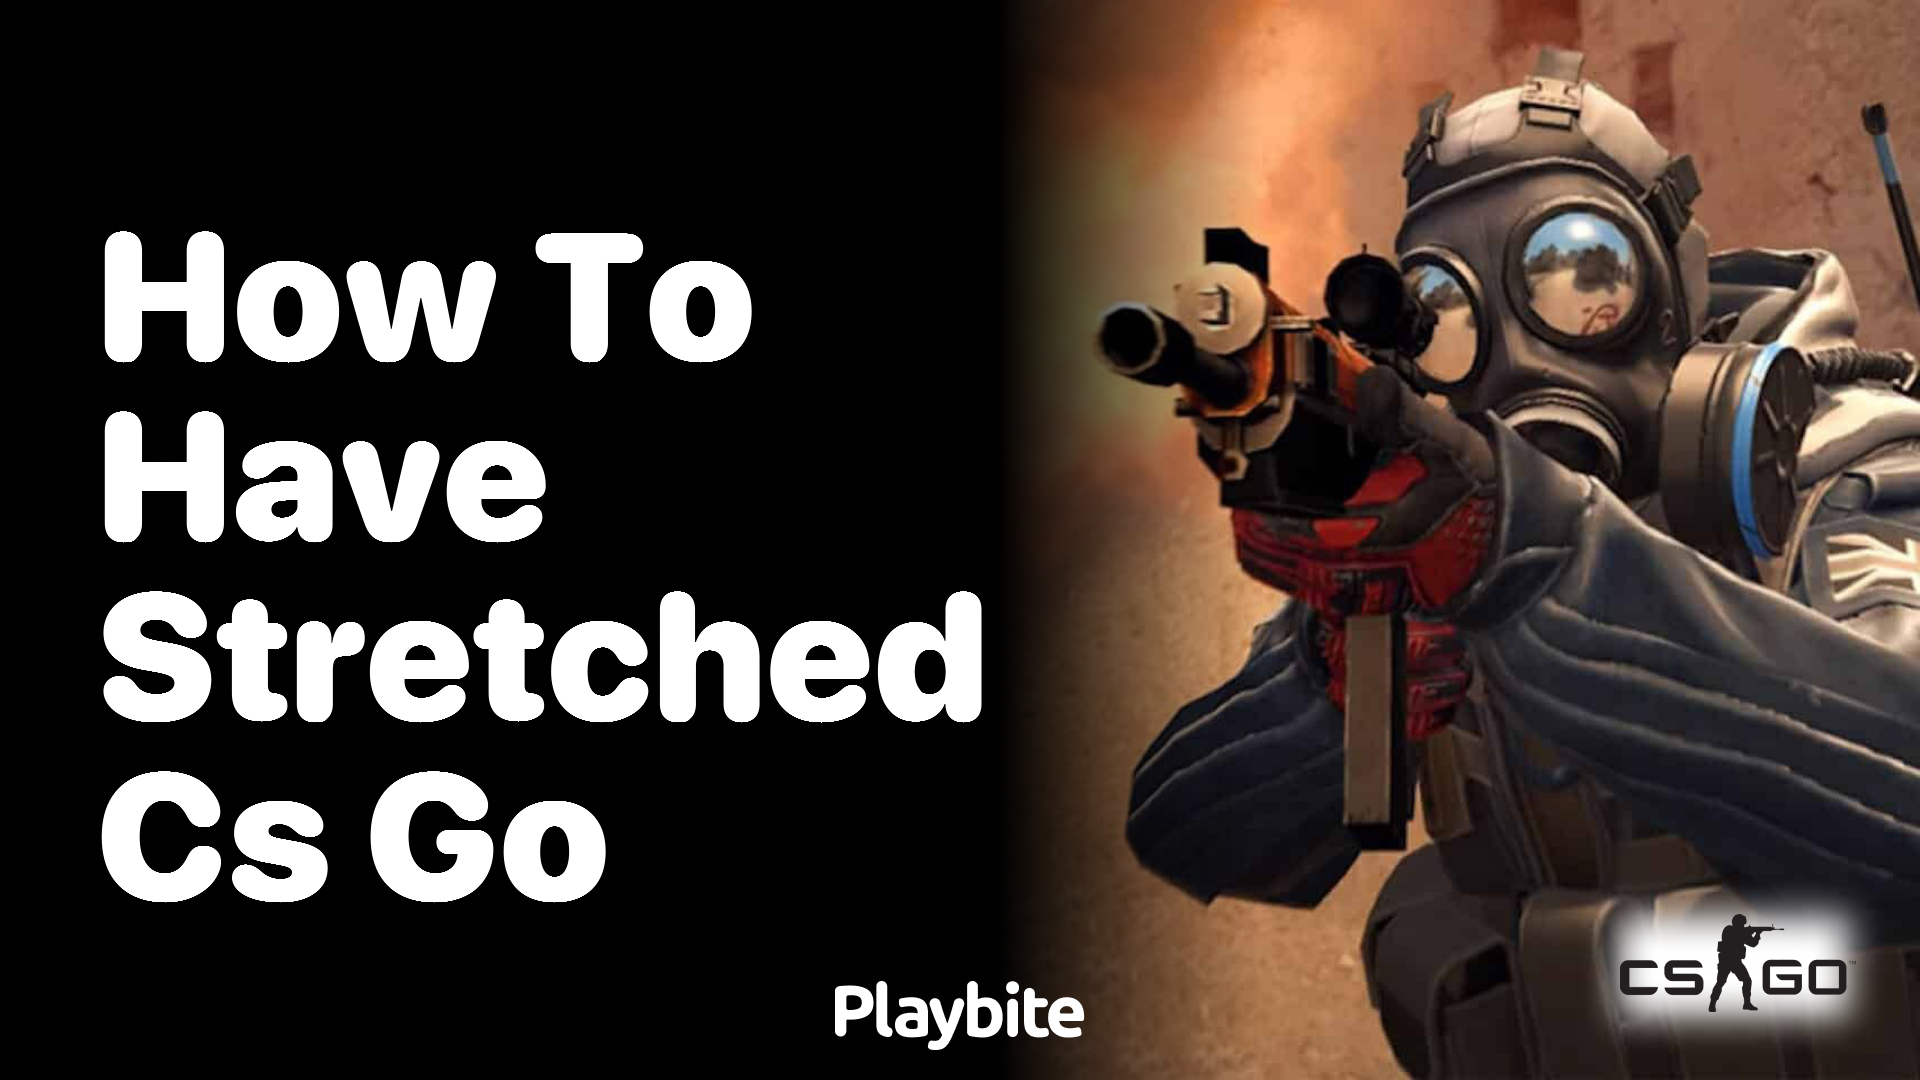 How to have stretched CS:GO